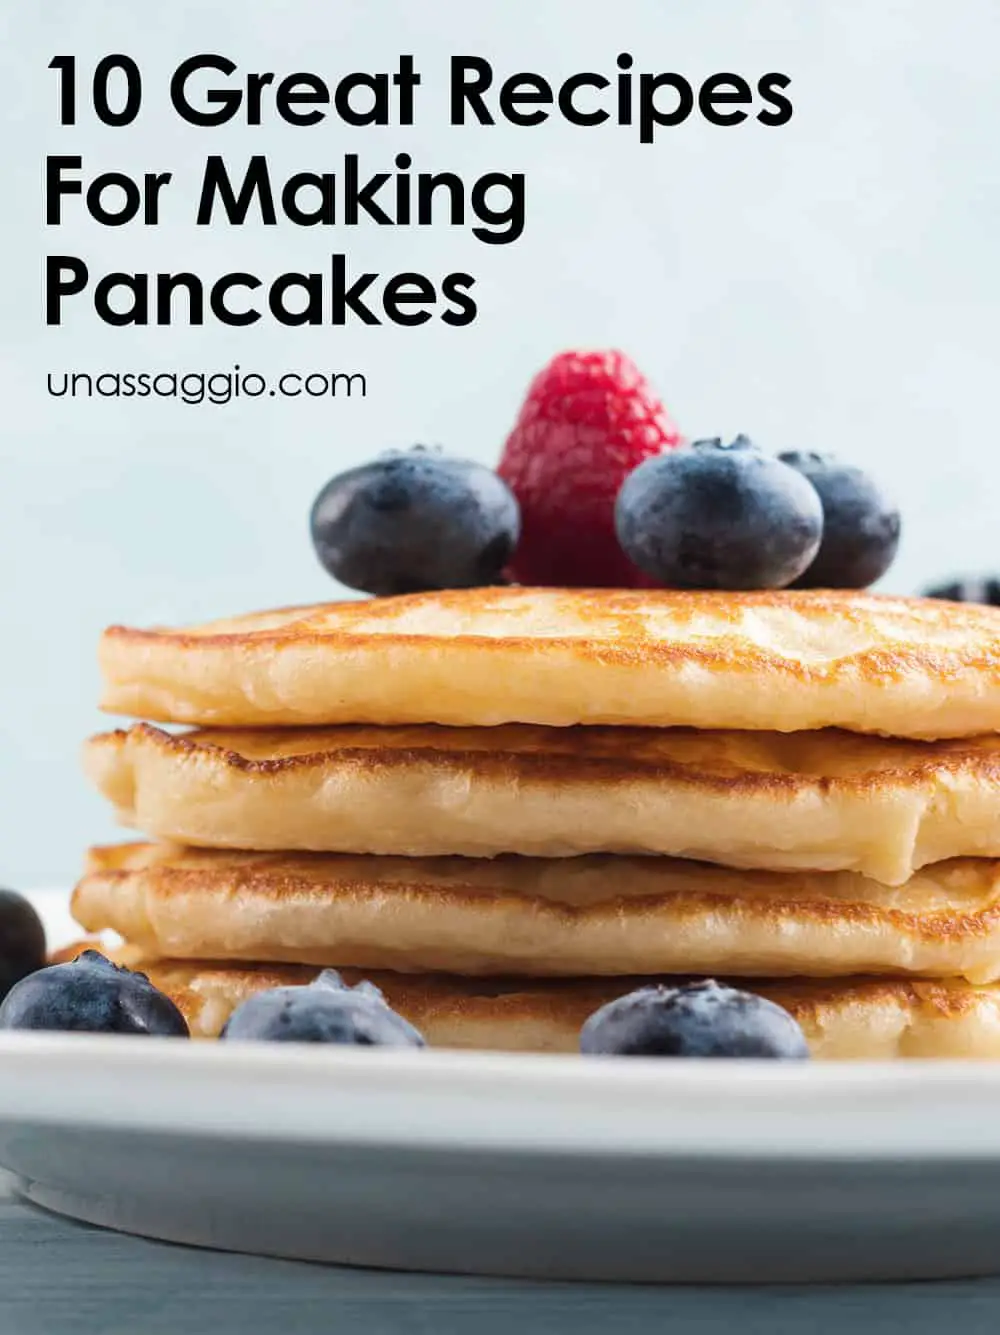 10 Great Recipes For Making Pancakes